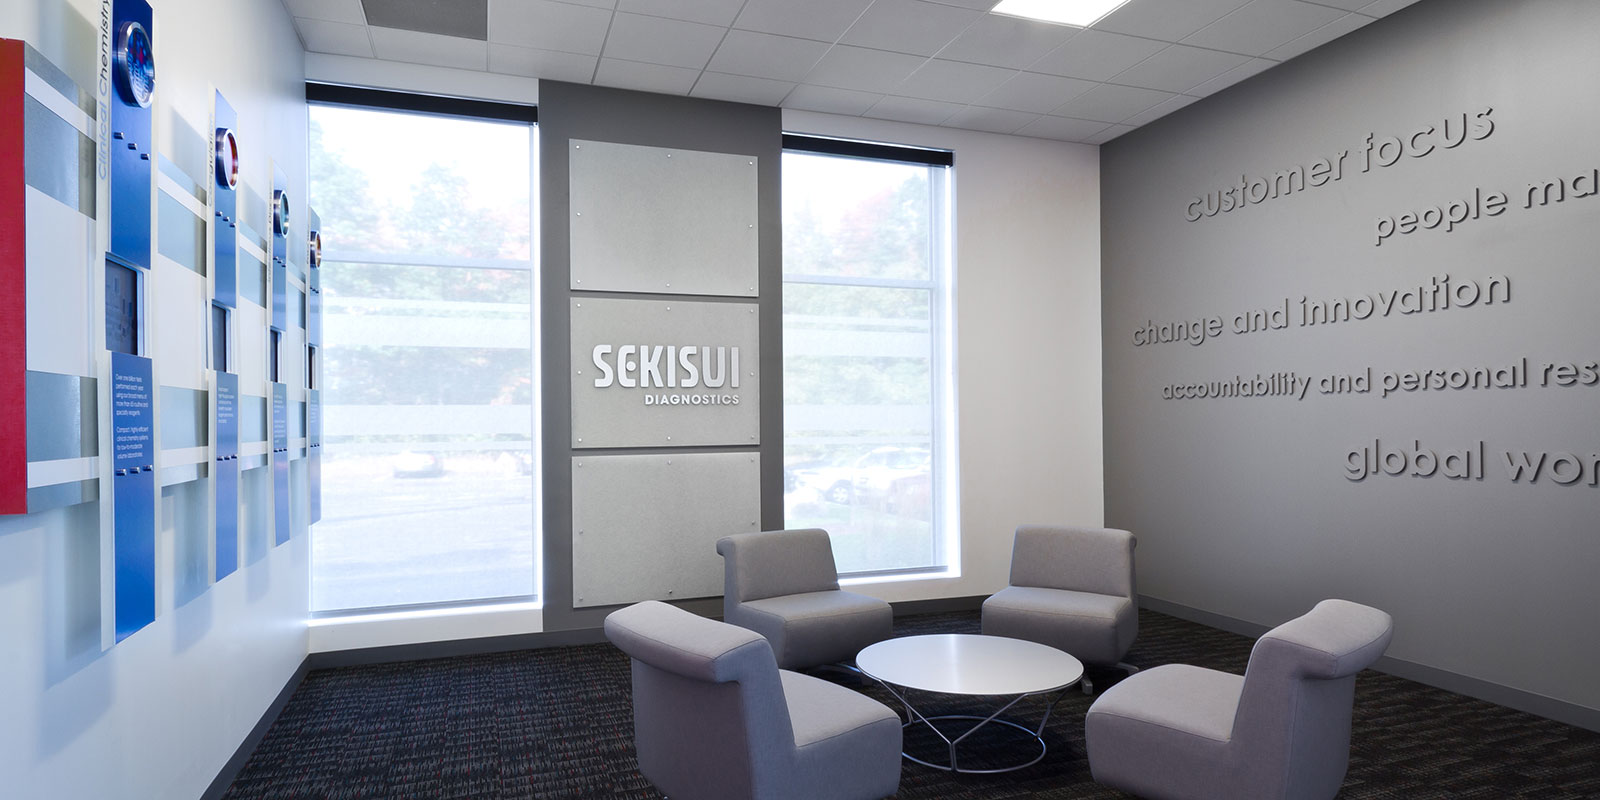 Hill & Partners Commercial Branded Environment for Sekisui 